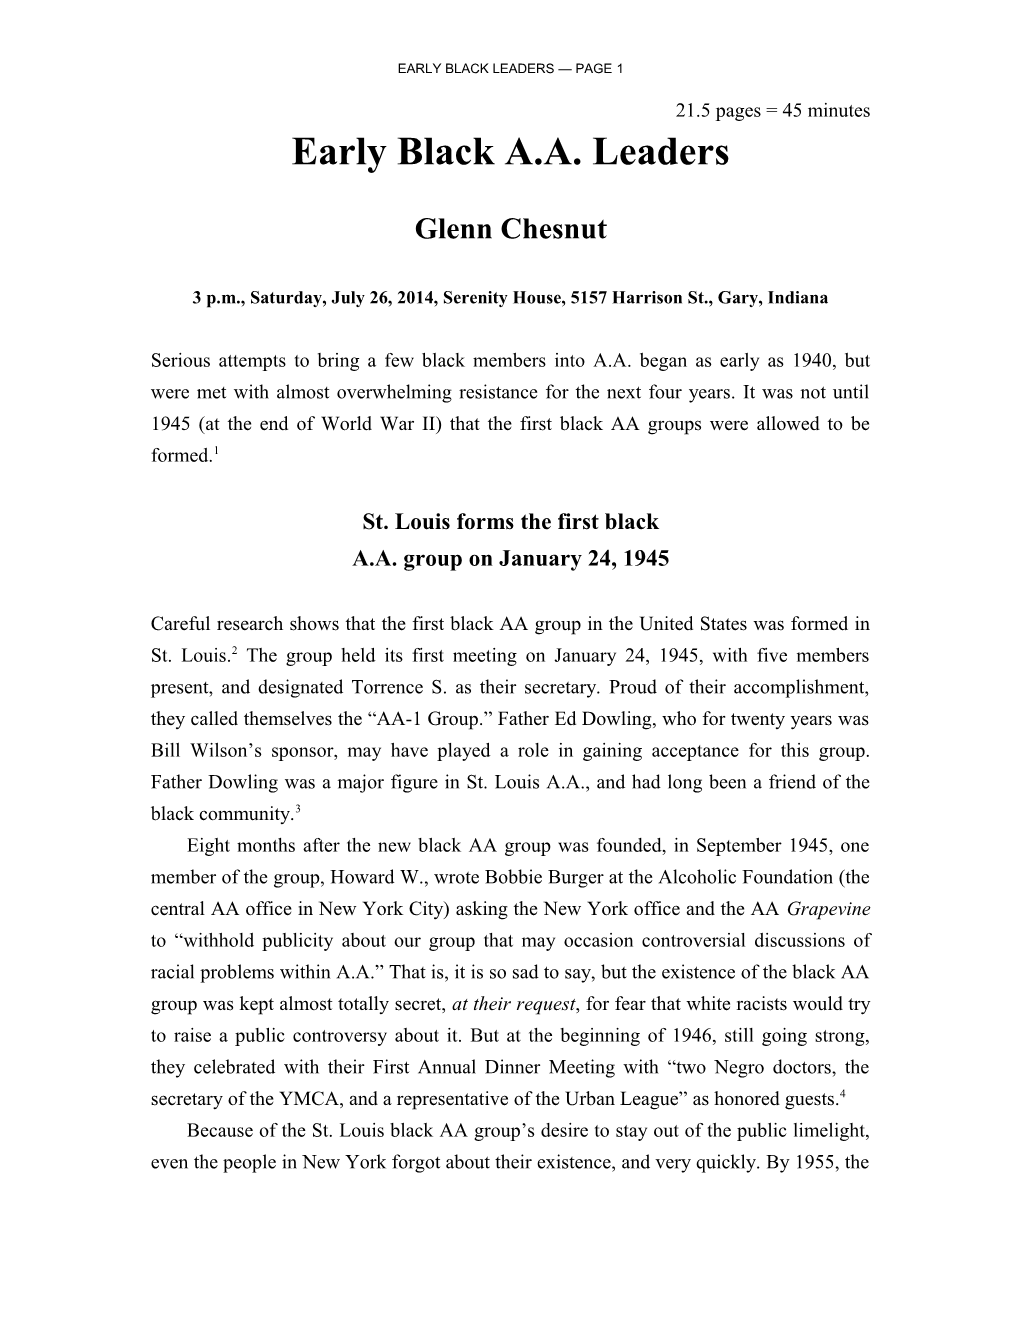 Early Black Leaders Page 1